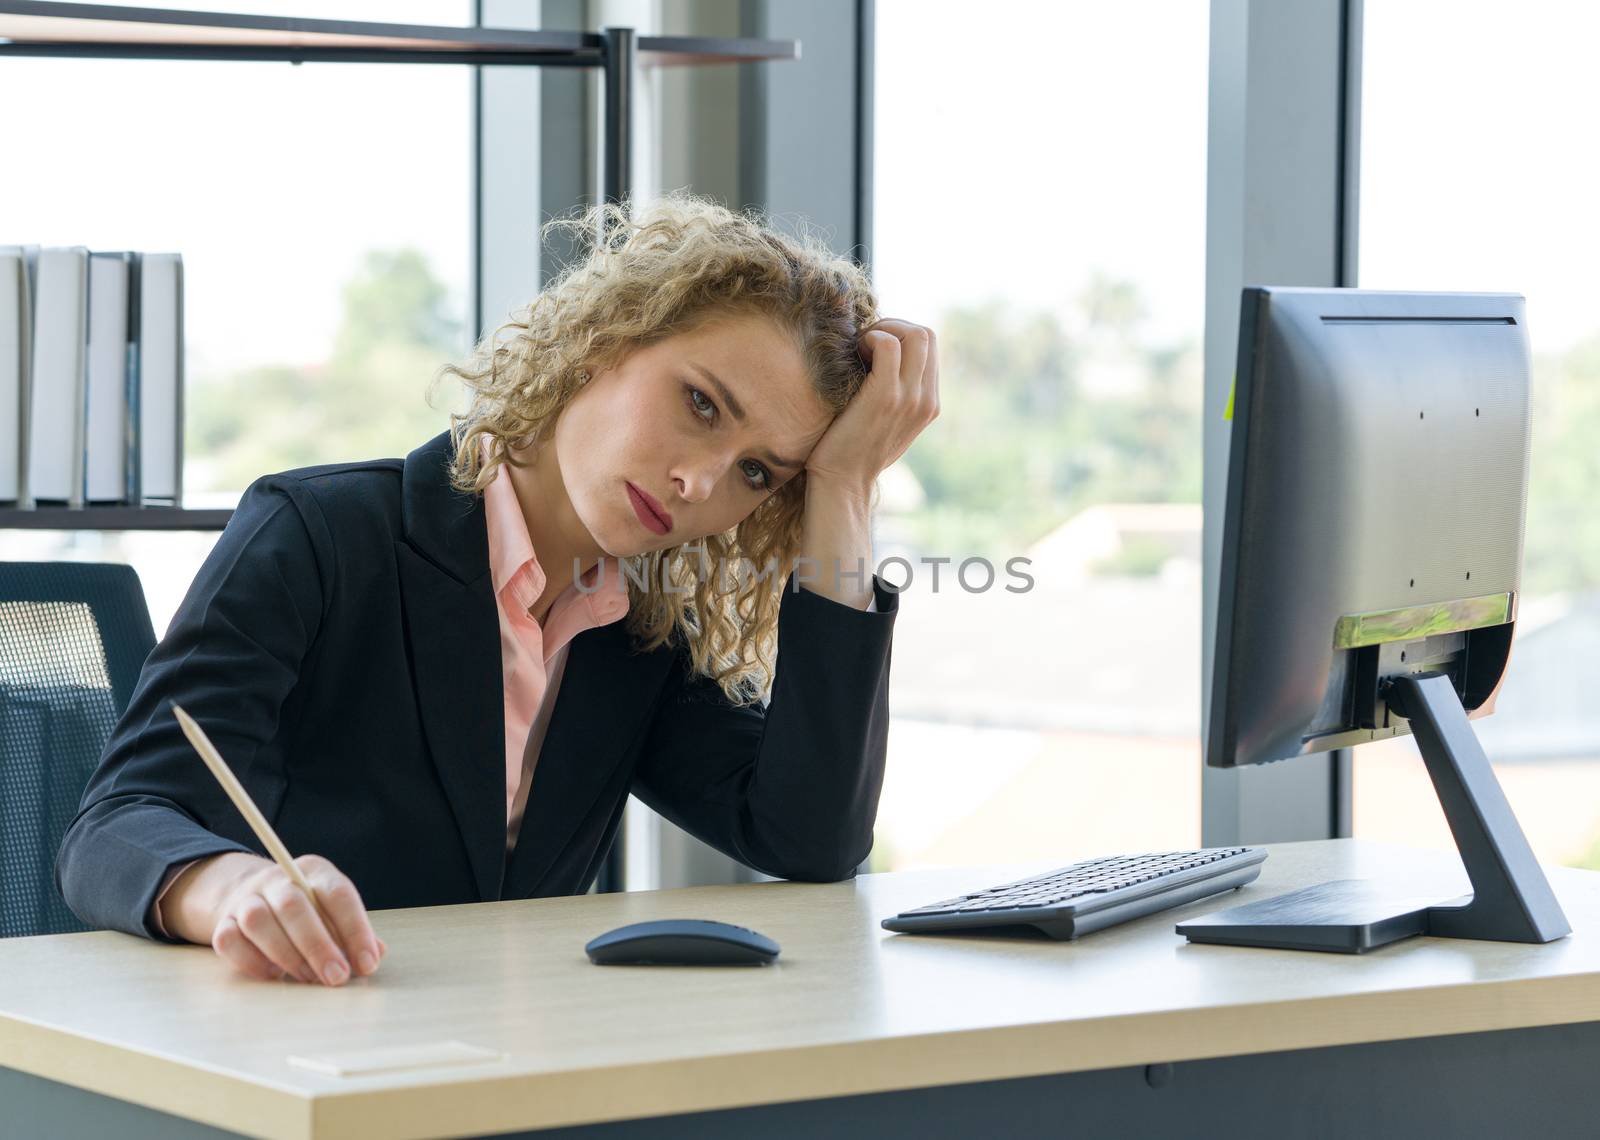 Morning work atmosphere In a modern office. Ukrainian employee hold the head with one hand at her desk. After receiving the assignments work